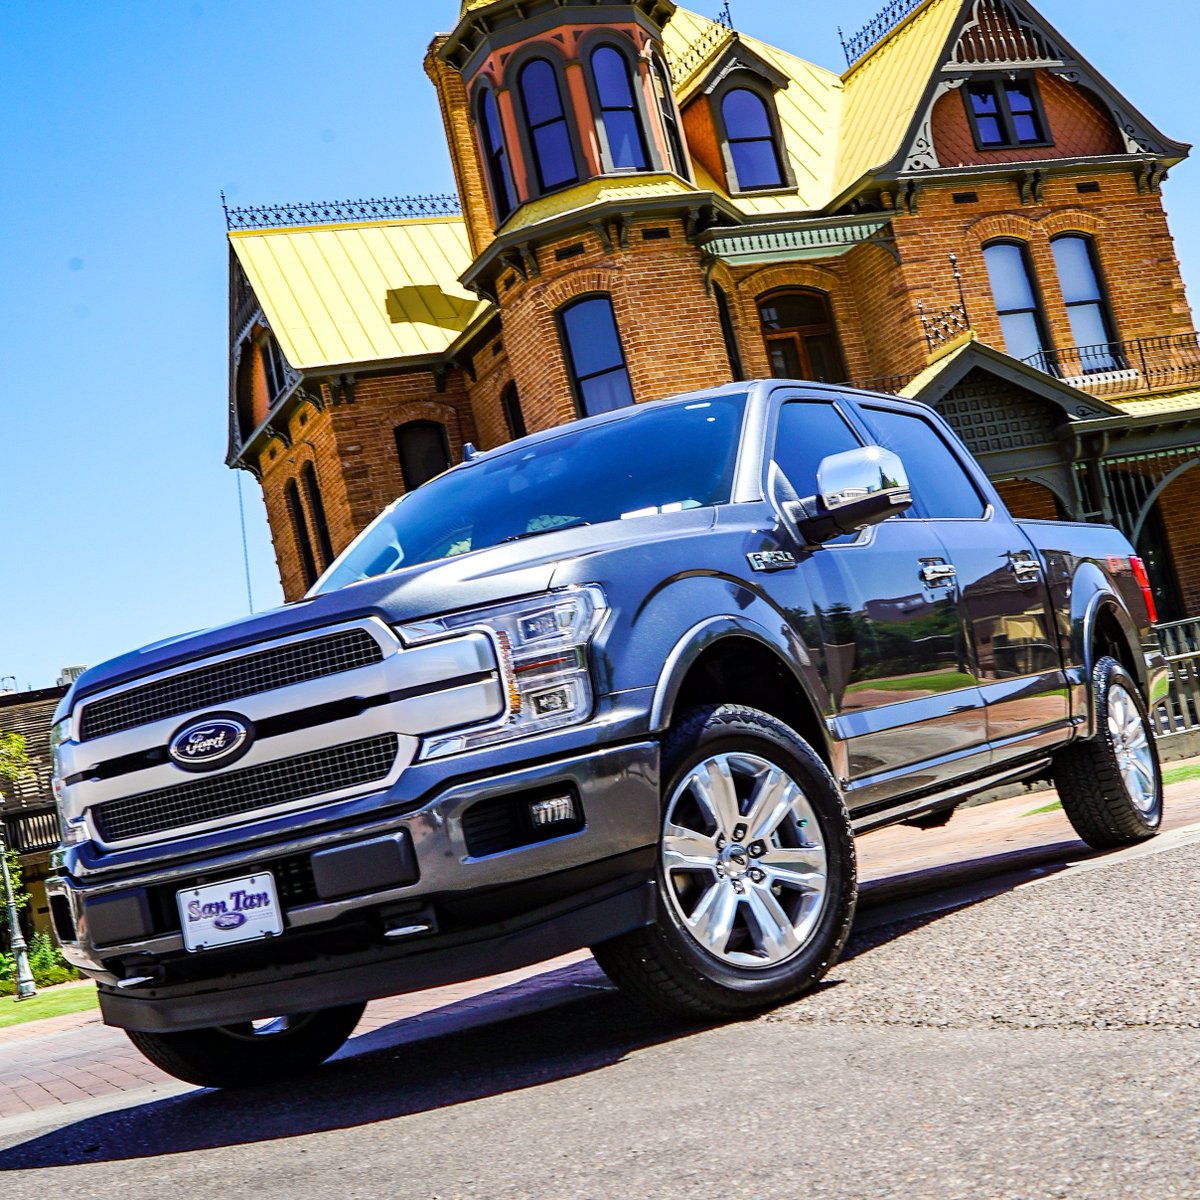 A San Tan Ford F-150 makes tough tasks look easy with its lightweight, military-grade, aluminum-alloy cab and bed. No wonder the competition is always scrambling to follow the leader! #WeAreSanTanFord #RossonHouse #HeritageSquare #Phoenix